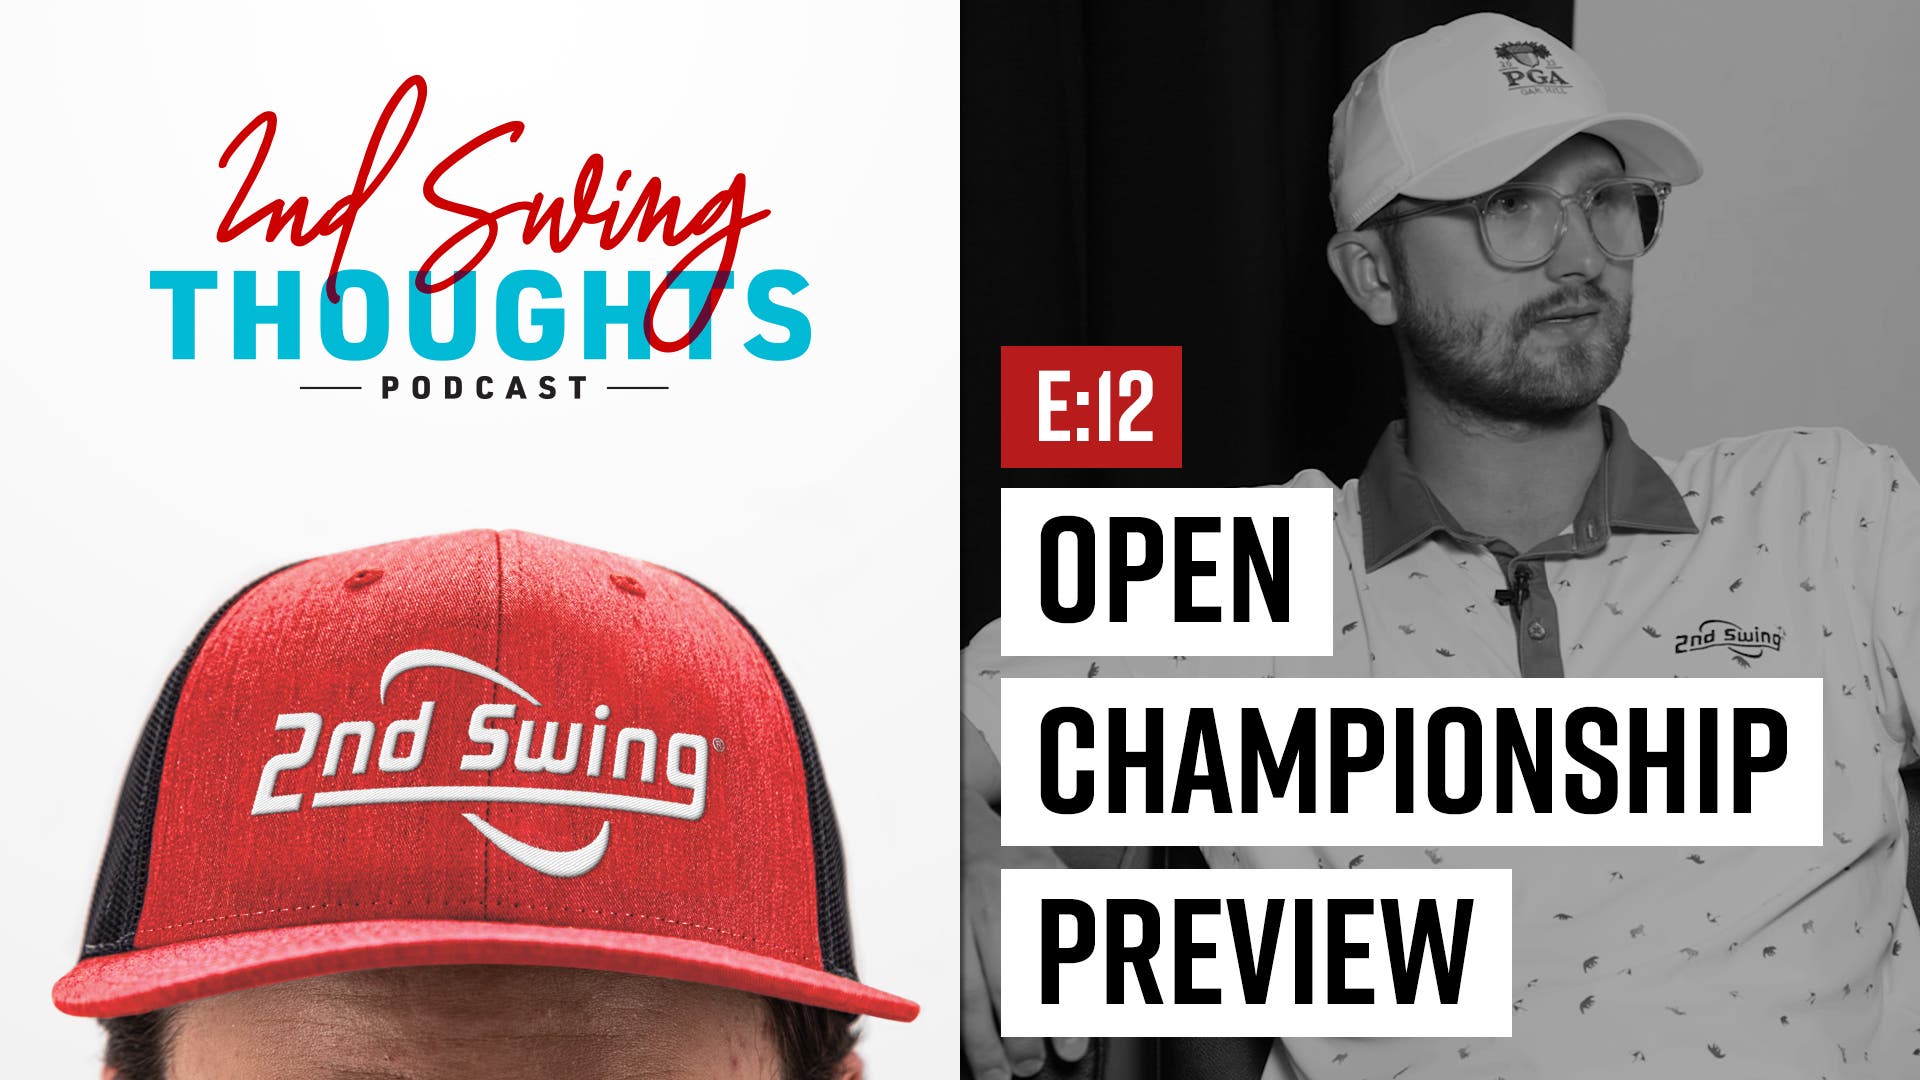 2nd Swing Thoughts | Episode 12: Open Championship Preview